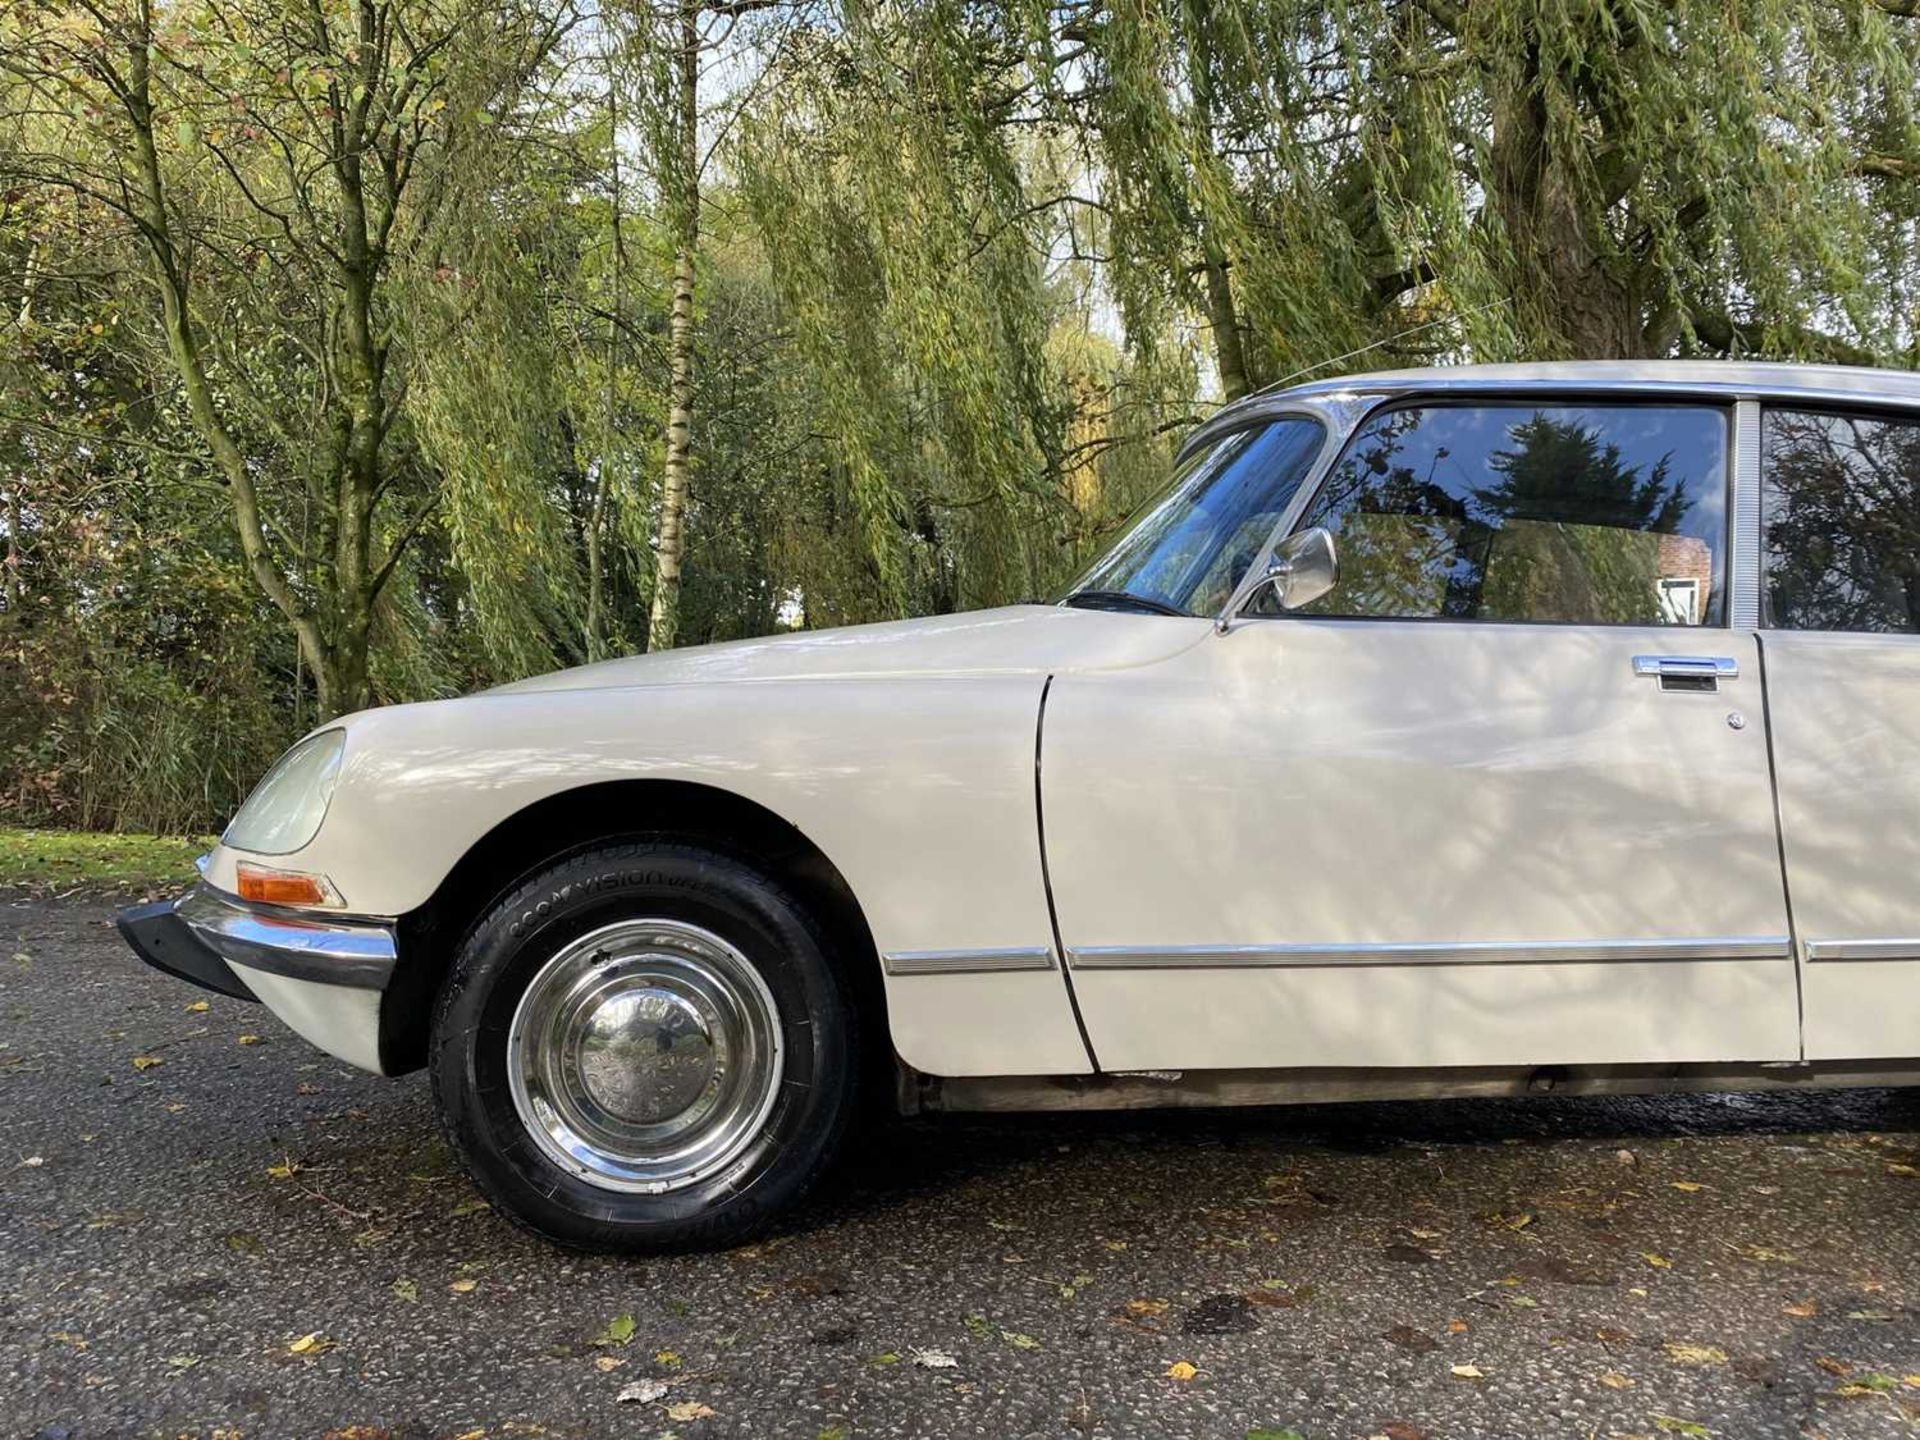 1971 Citroën DS21 Recently completed a 2,000 mile European grand tour - Image 75 of 100